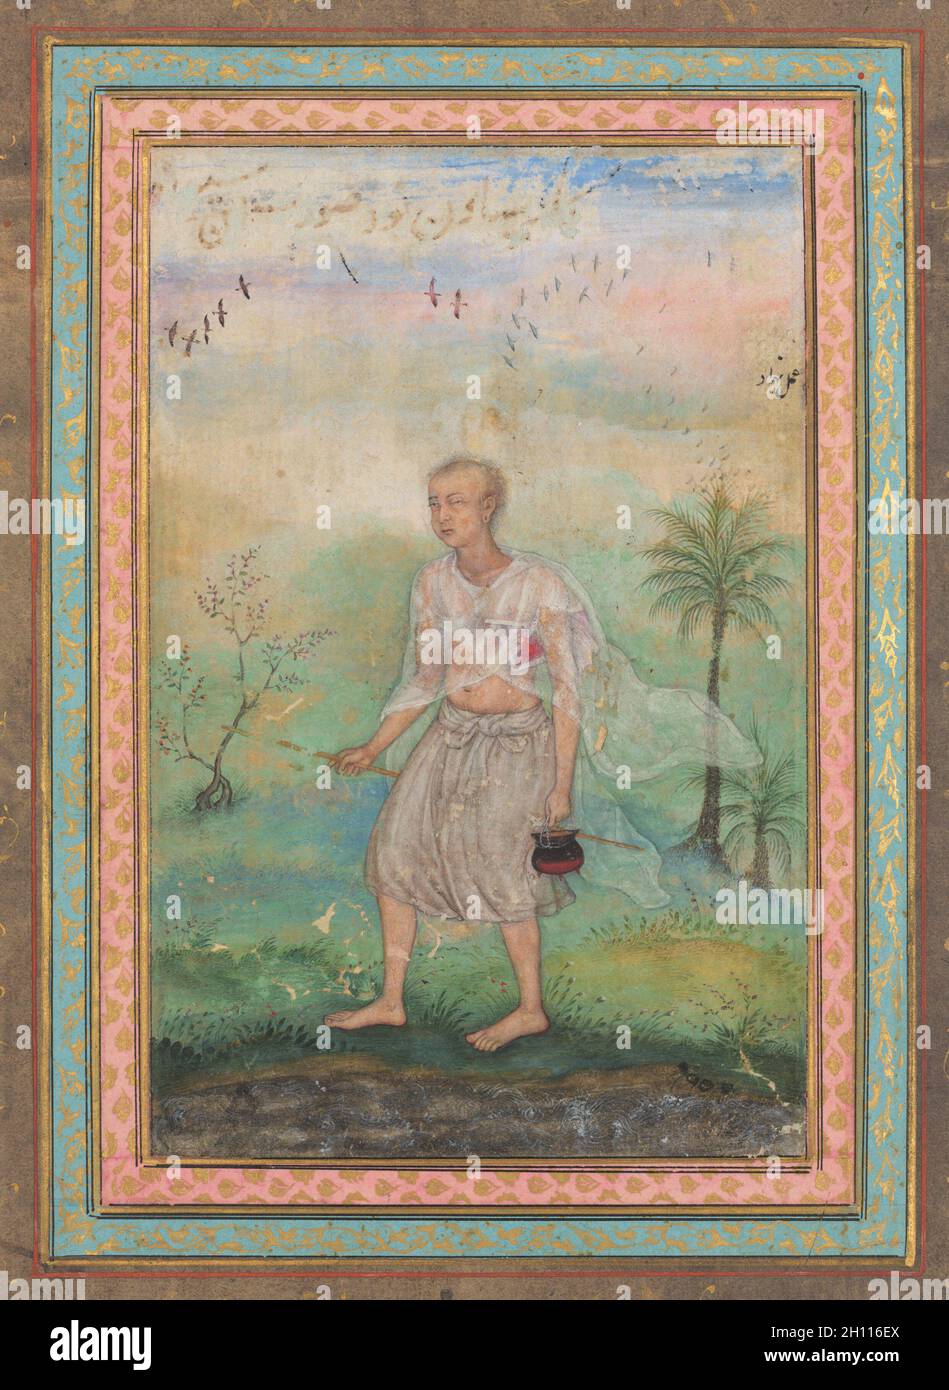 Jain Ascetic Walking Along a Riverbank, c. 1600. Basavana (Indian, active c. 1560–1600). Ink and color on paper; image: 14.7 x 9.8 cm (5 13/16 x 3 7/8 in.); overall: 38.8 x 26.3 cm (15 1/4 x 10 3/8 in.); with mat: 49 x 36.3 cm (19 5/16 x 14 5/16 in.). Stock Photo